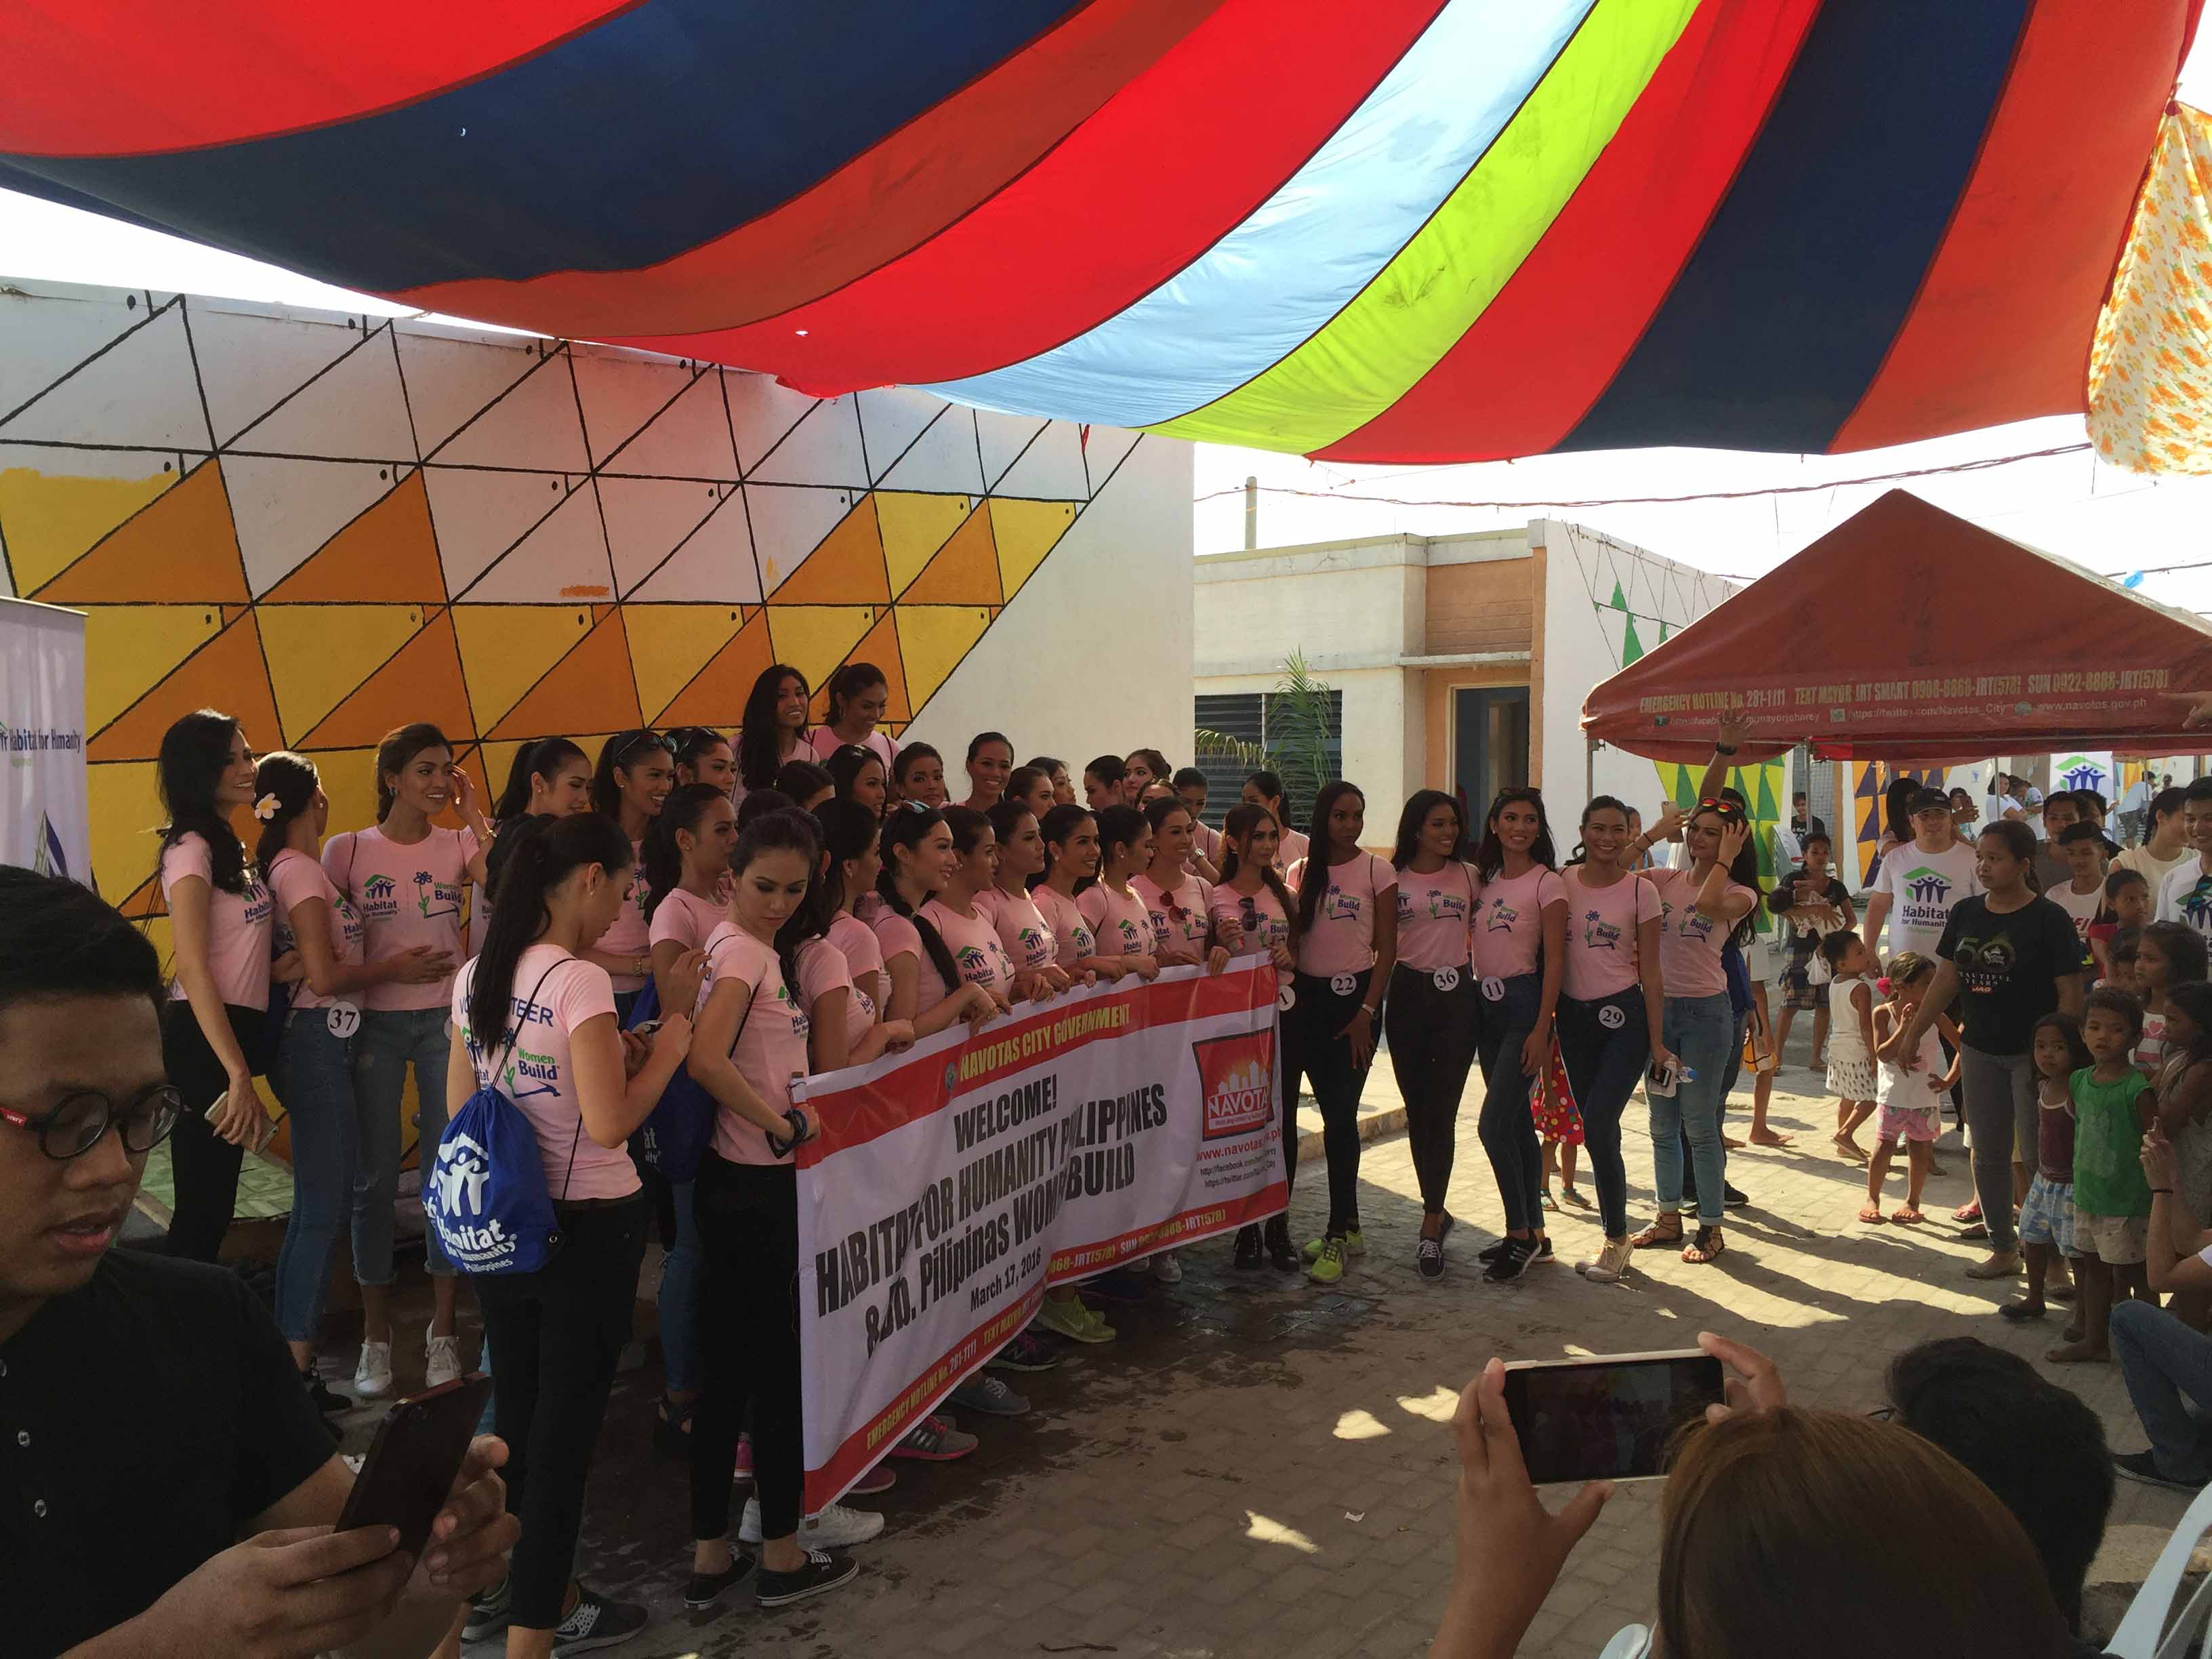 The Habitat for Humanity: Bb. Pilipinas Mural Painting 2016